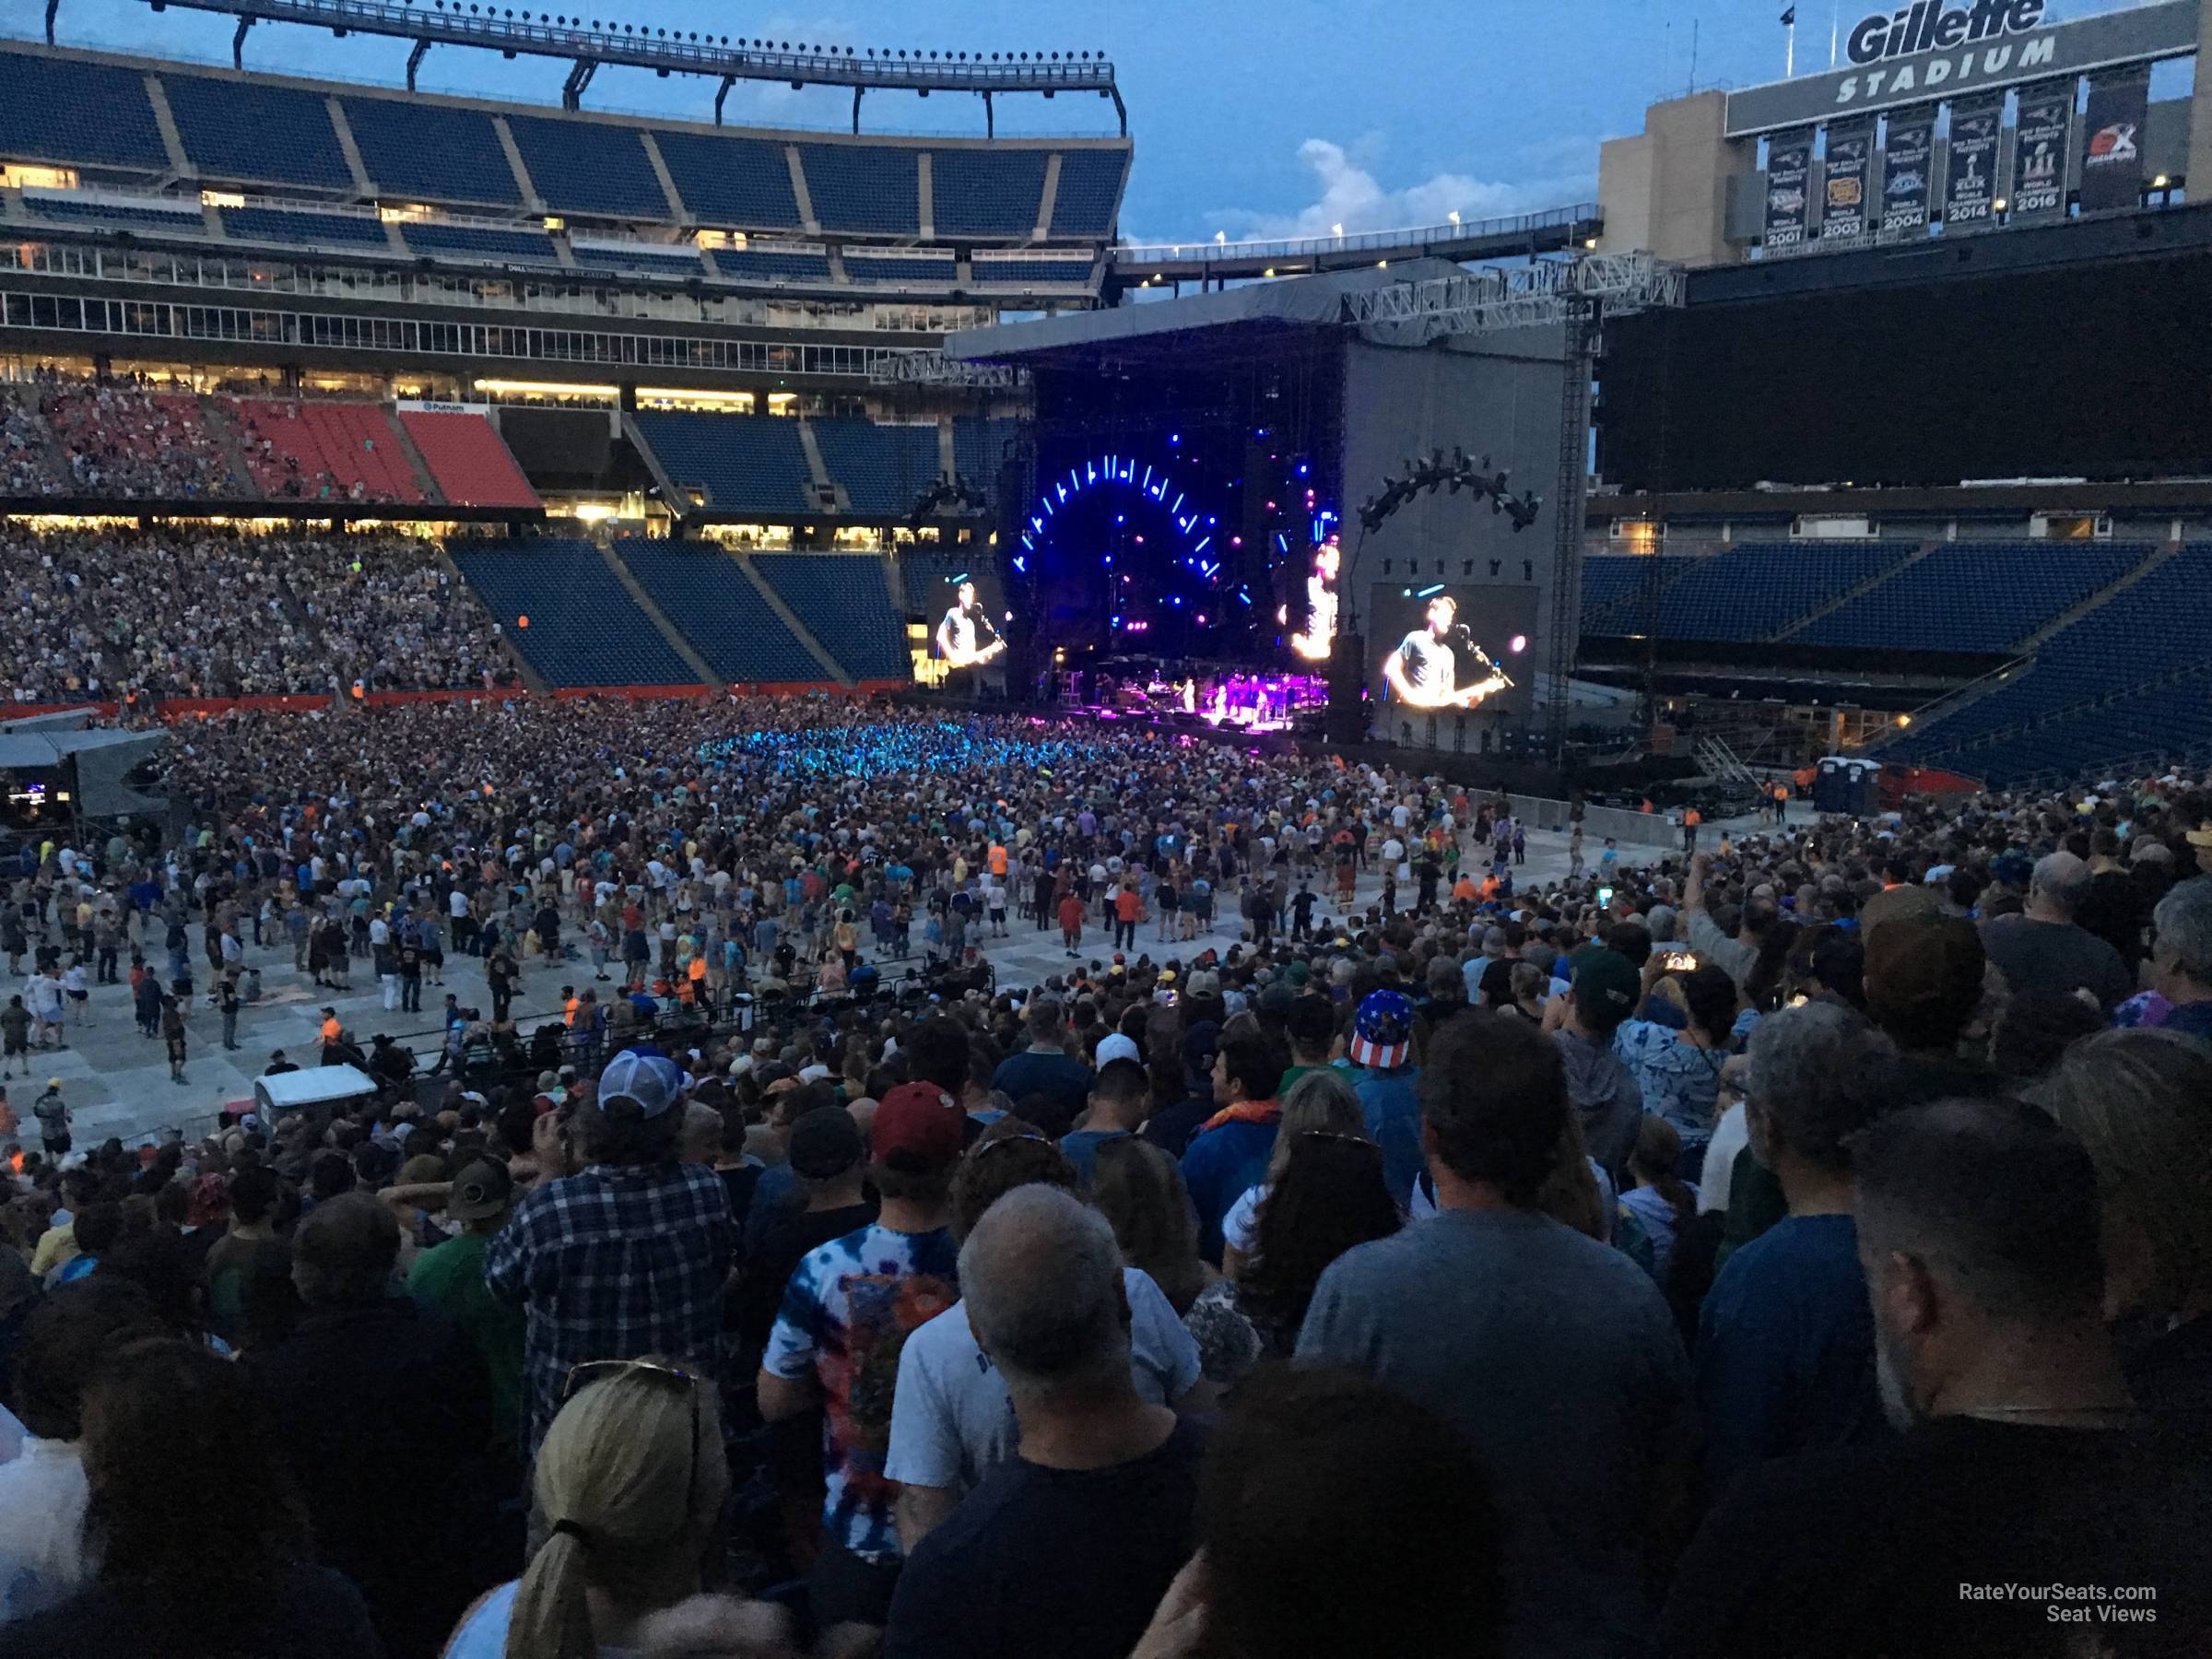 section 132, row 38 seat view  for concert - gillette stadium